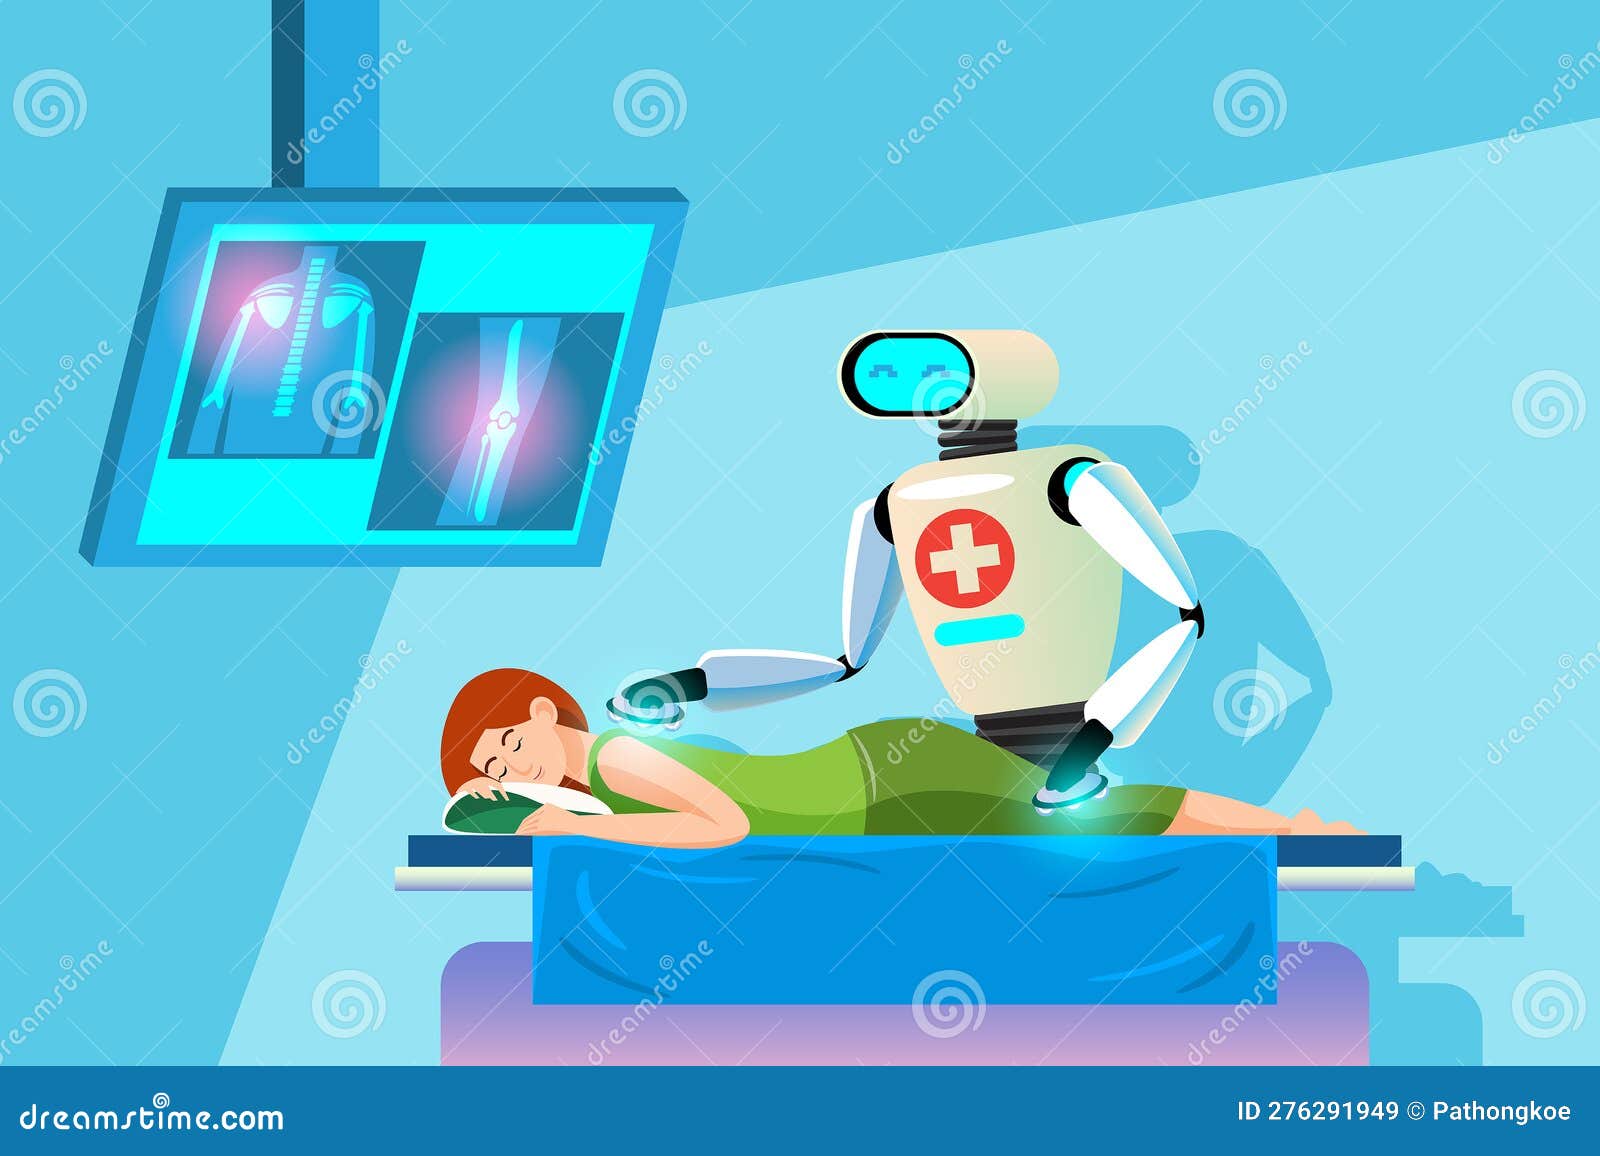 Physical Therapy Robot Body Massage Back And Knee Massage Stock Illustration Illustration